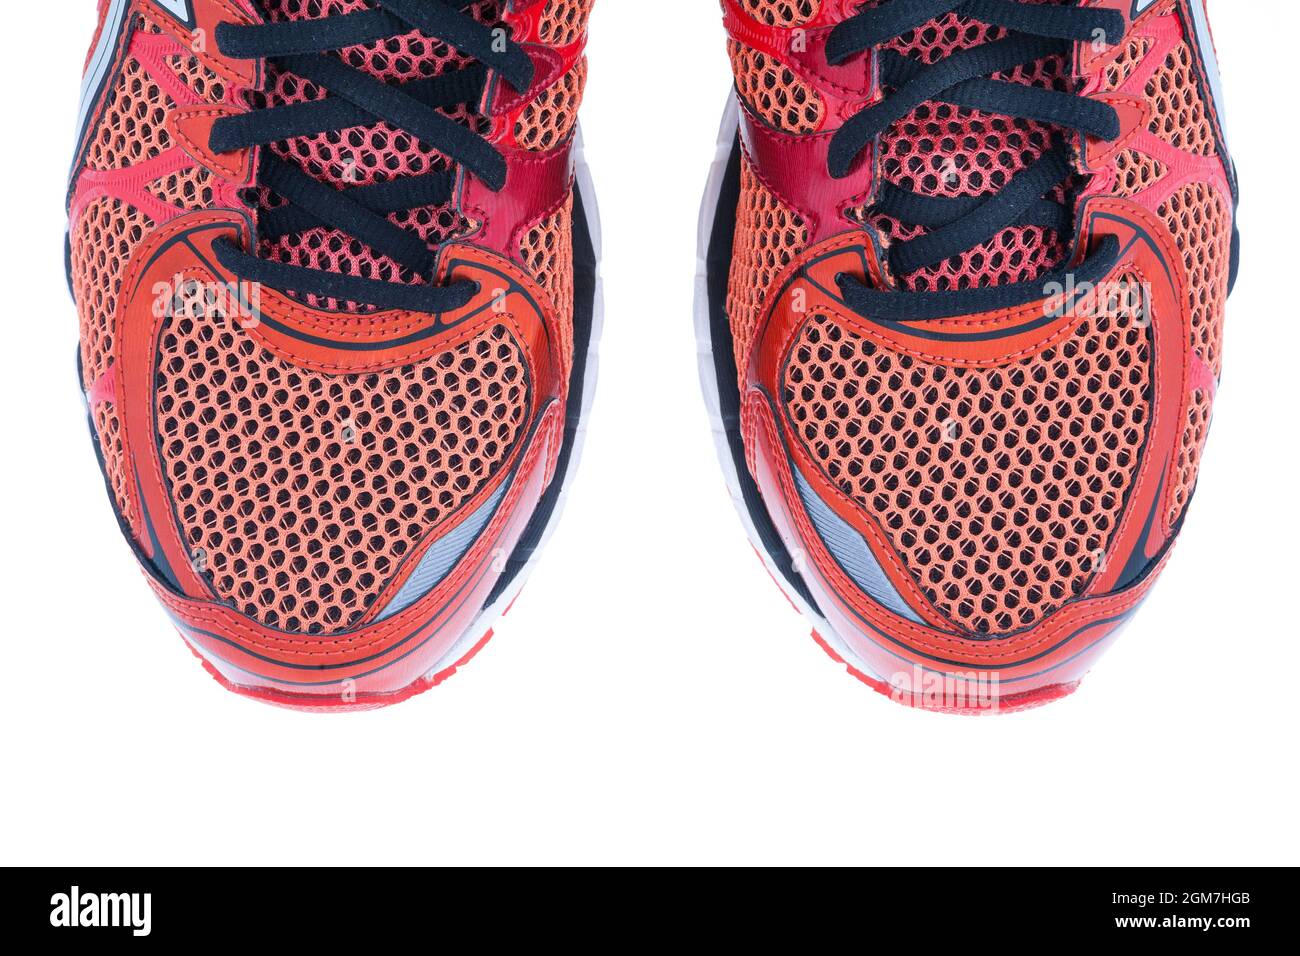 Red running shoes with black laces on a white background Stock Photo